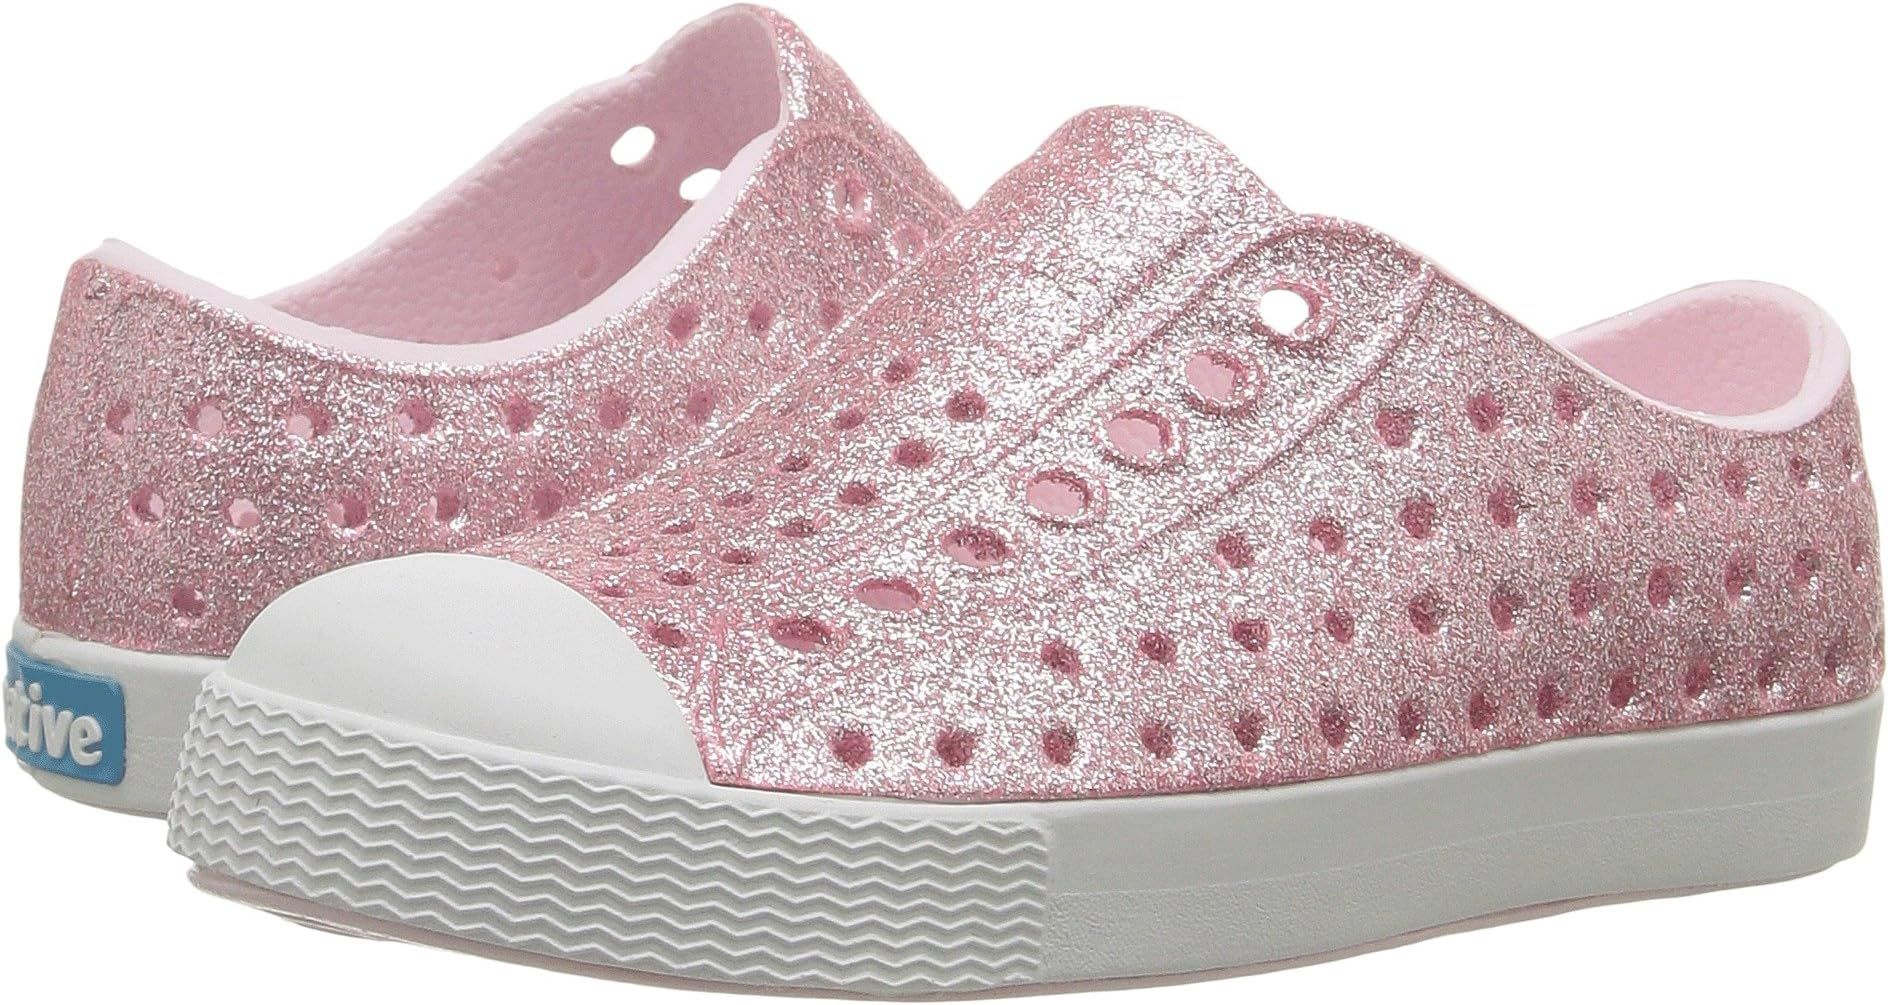 Кроссовки Jefferson Bling Glitter Native Shoes Kids, цвет Milk Pink Bling/Shell White children casual sneakers girl pink princess bling sequins light tennis running shoes kids students black soft sports shoes 26 37